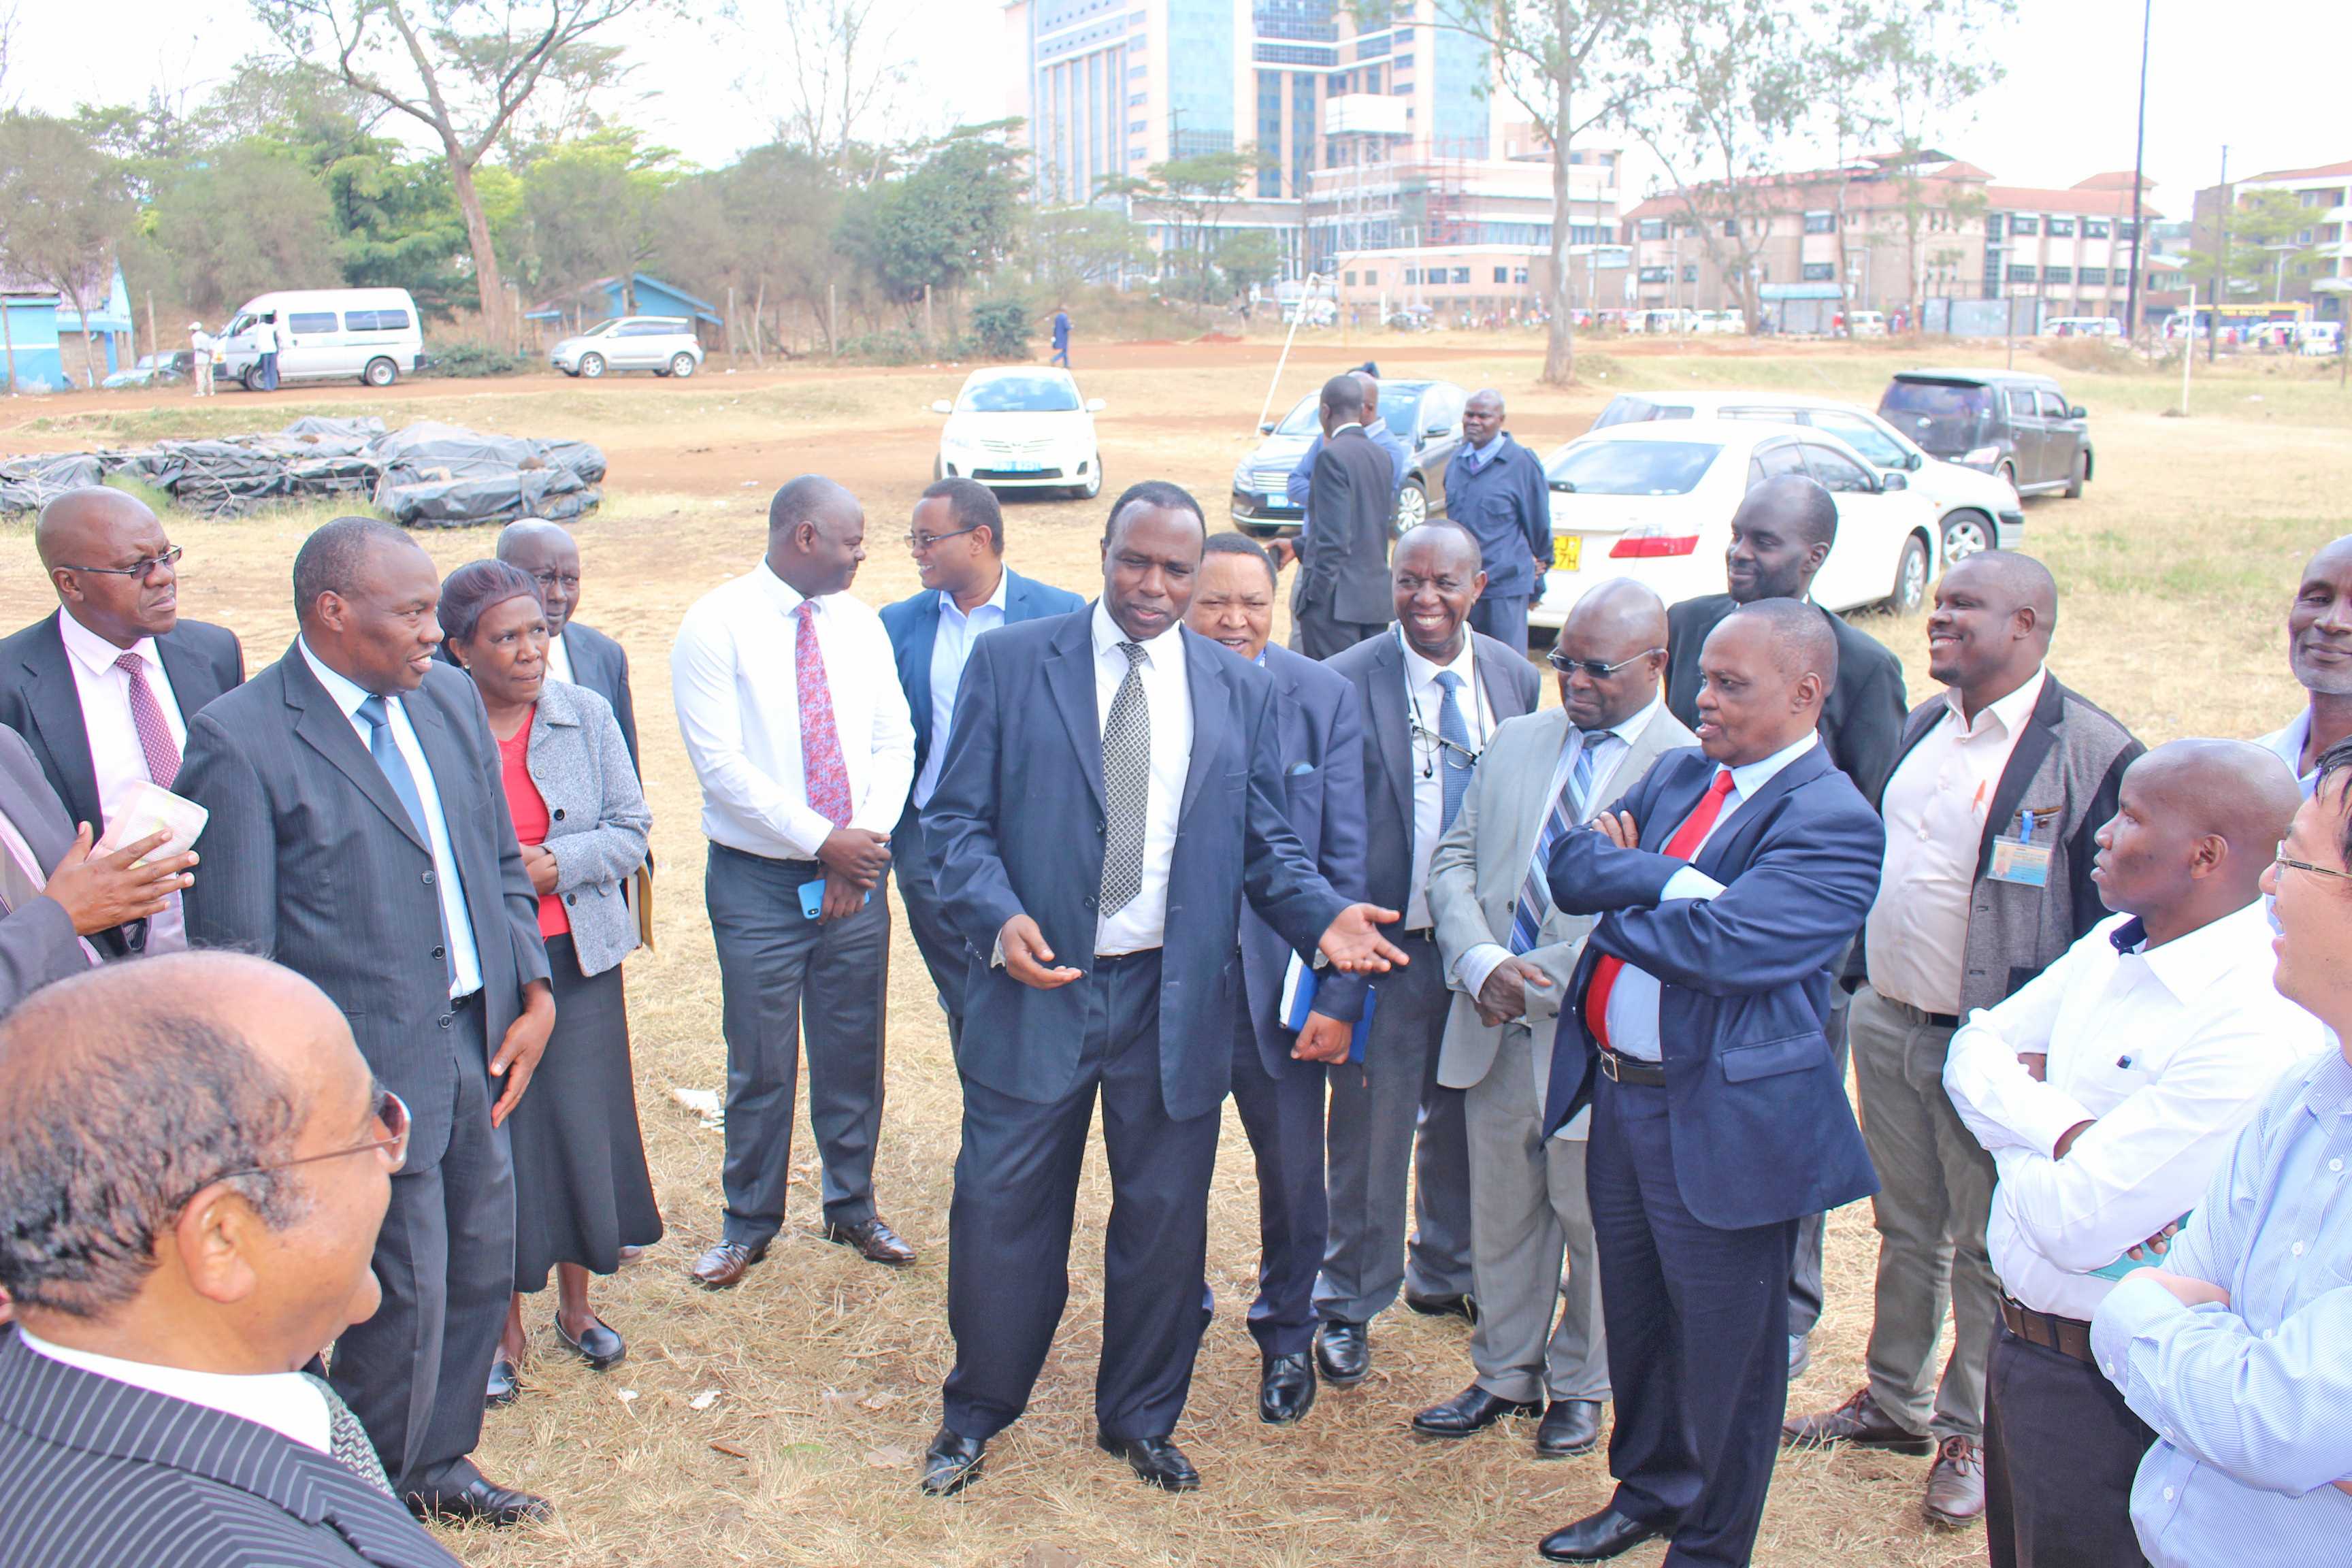 Official handover of the site for the construction of the kidney hospital by the University of Nairobi management led by acting Vice Chancellor Prof. Isaac Mbeche, College of Health Sciences Principal, Prof. James Machoki and officials from Kenyatta National Hospital, Ministry of Health and African Development Bank.